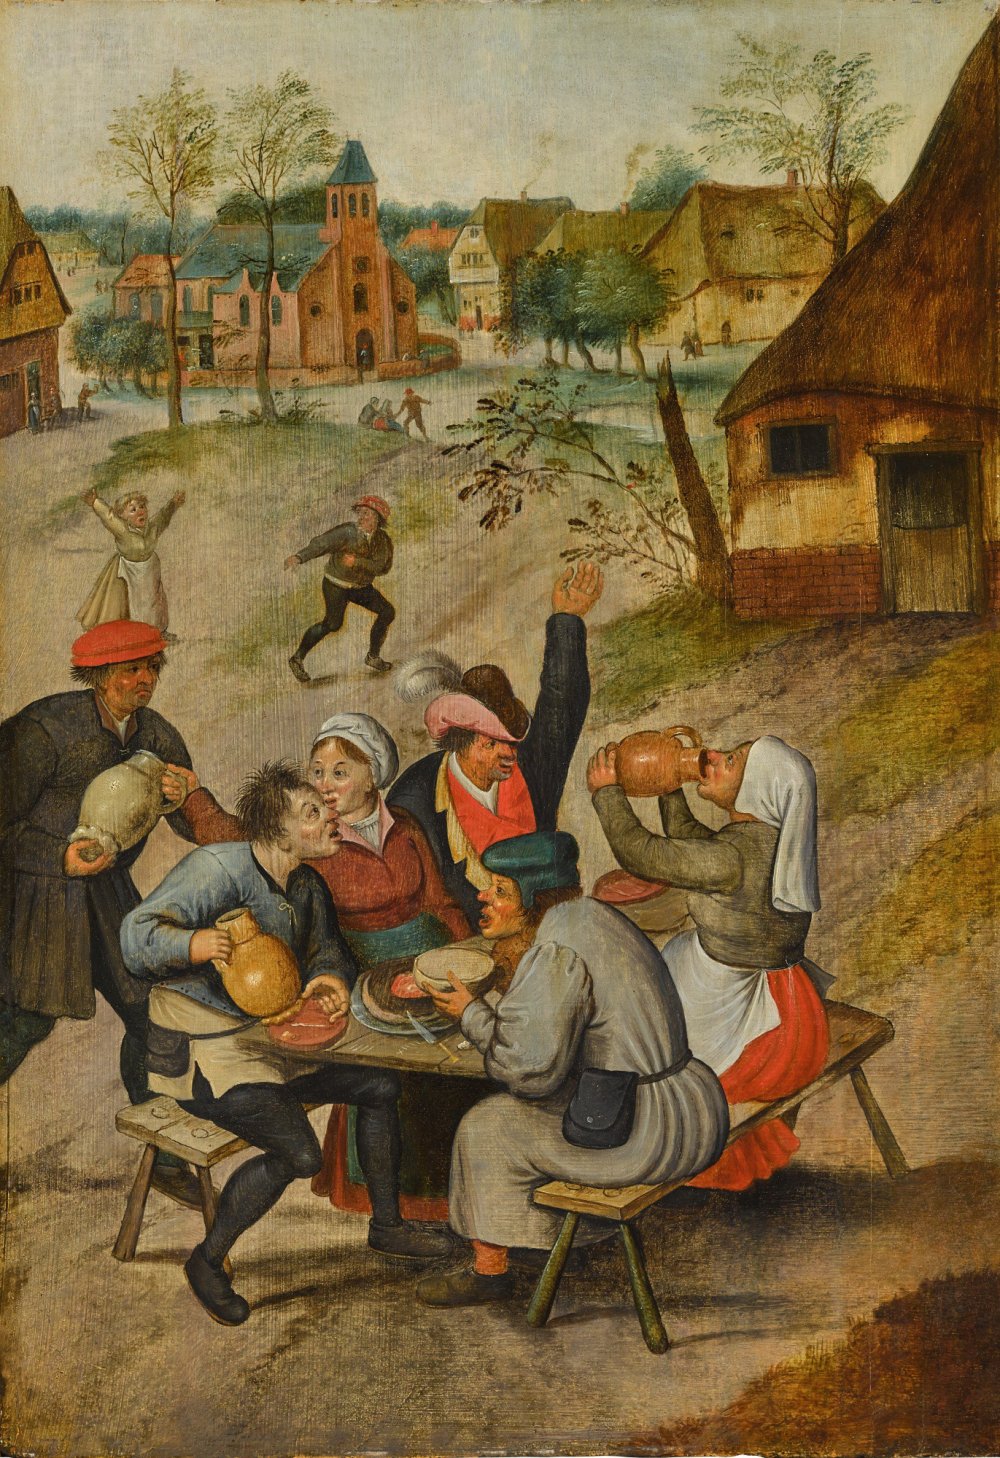 Pieter Brueghel the Younger, A village scene with peasants carousing